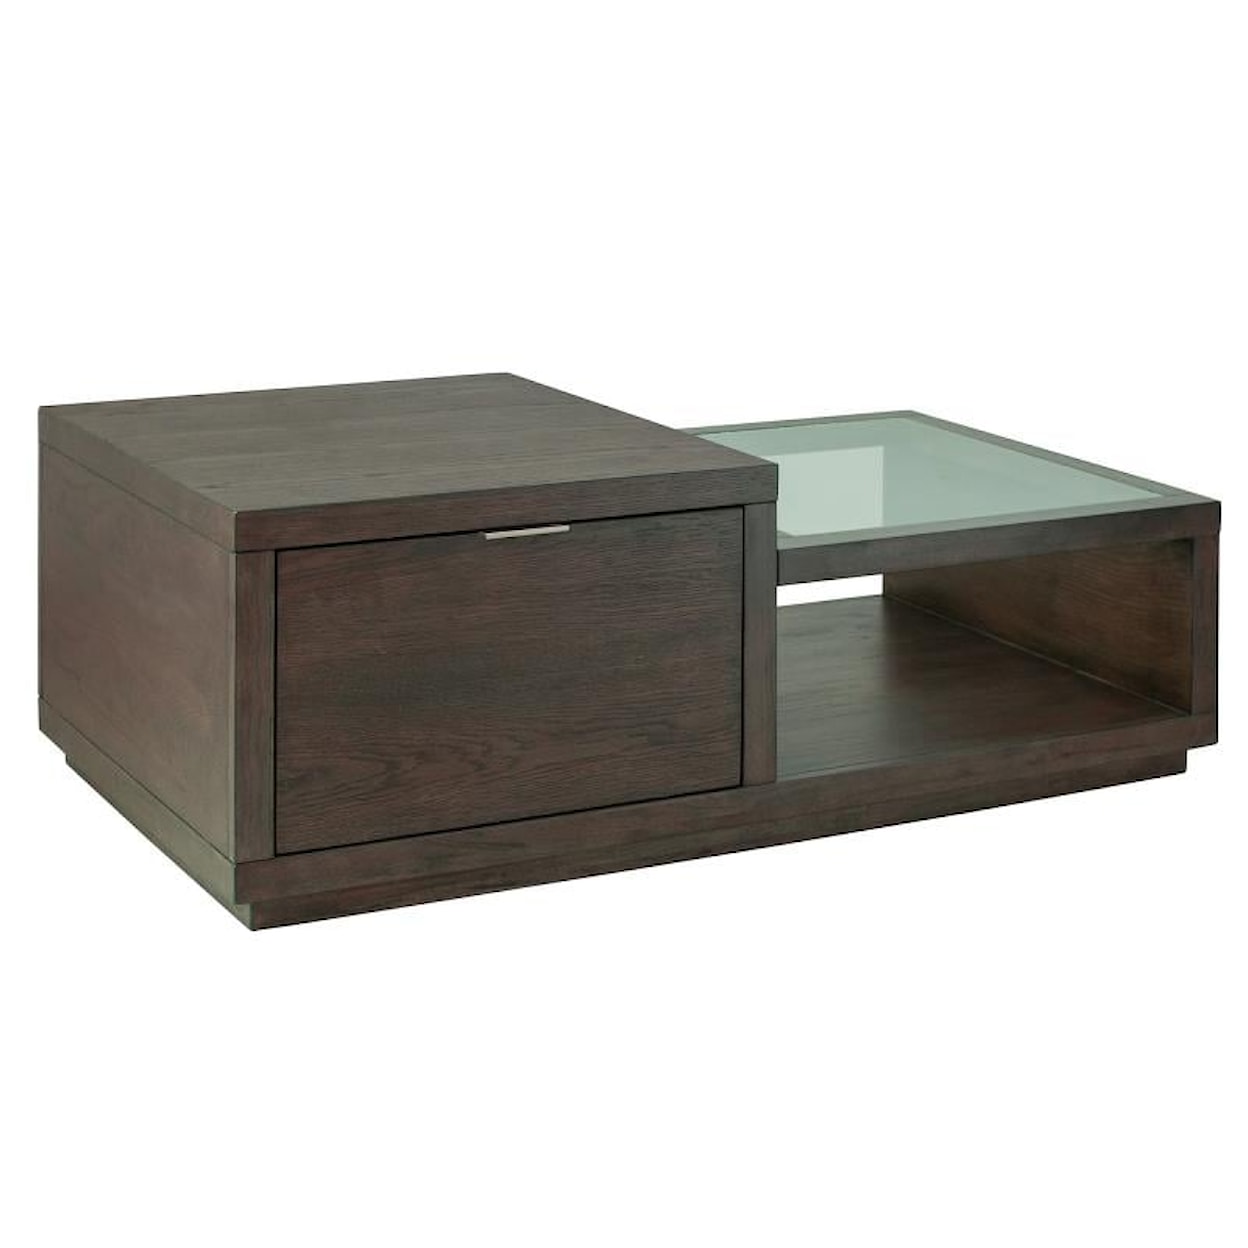 Magnussen Home Merrick Occasional Tables Rectangular Cocktail Table